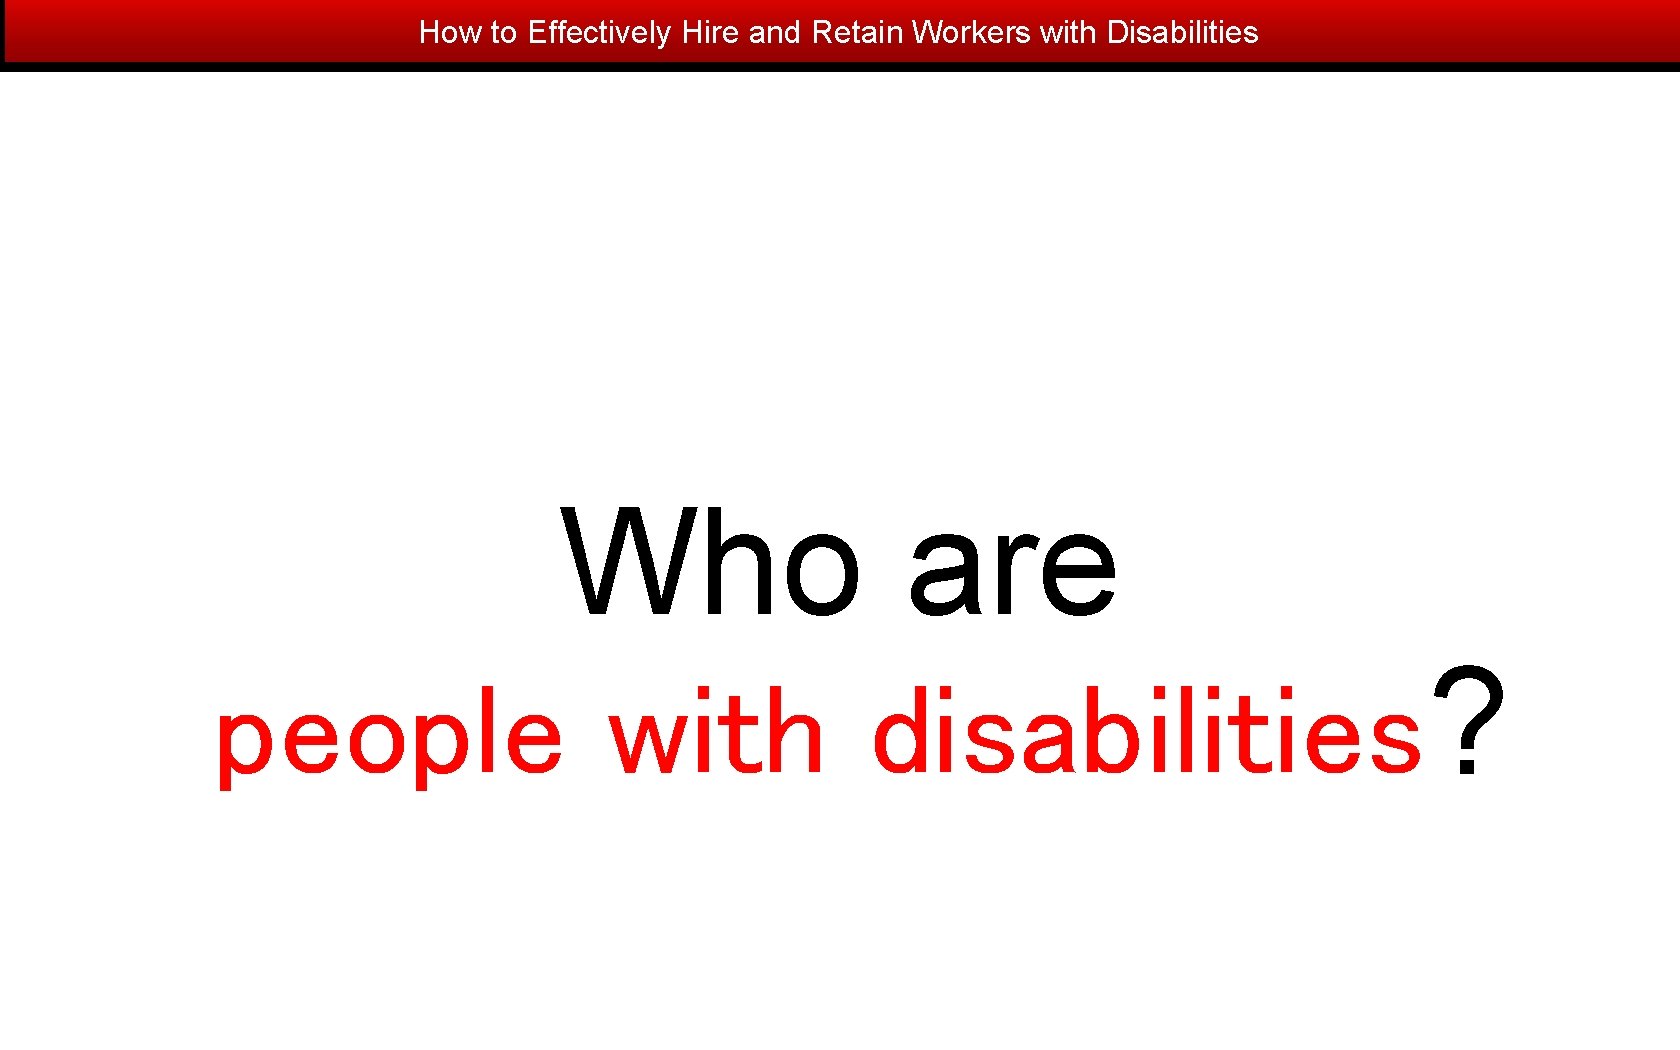 How to Effectively Hire and Retain Workers with Disabilities Who are people with disabilities?